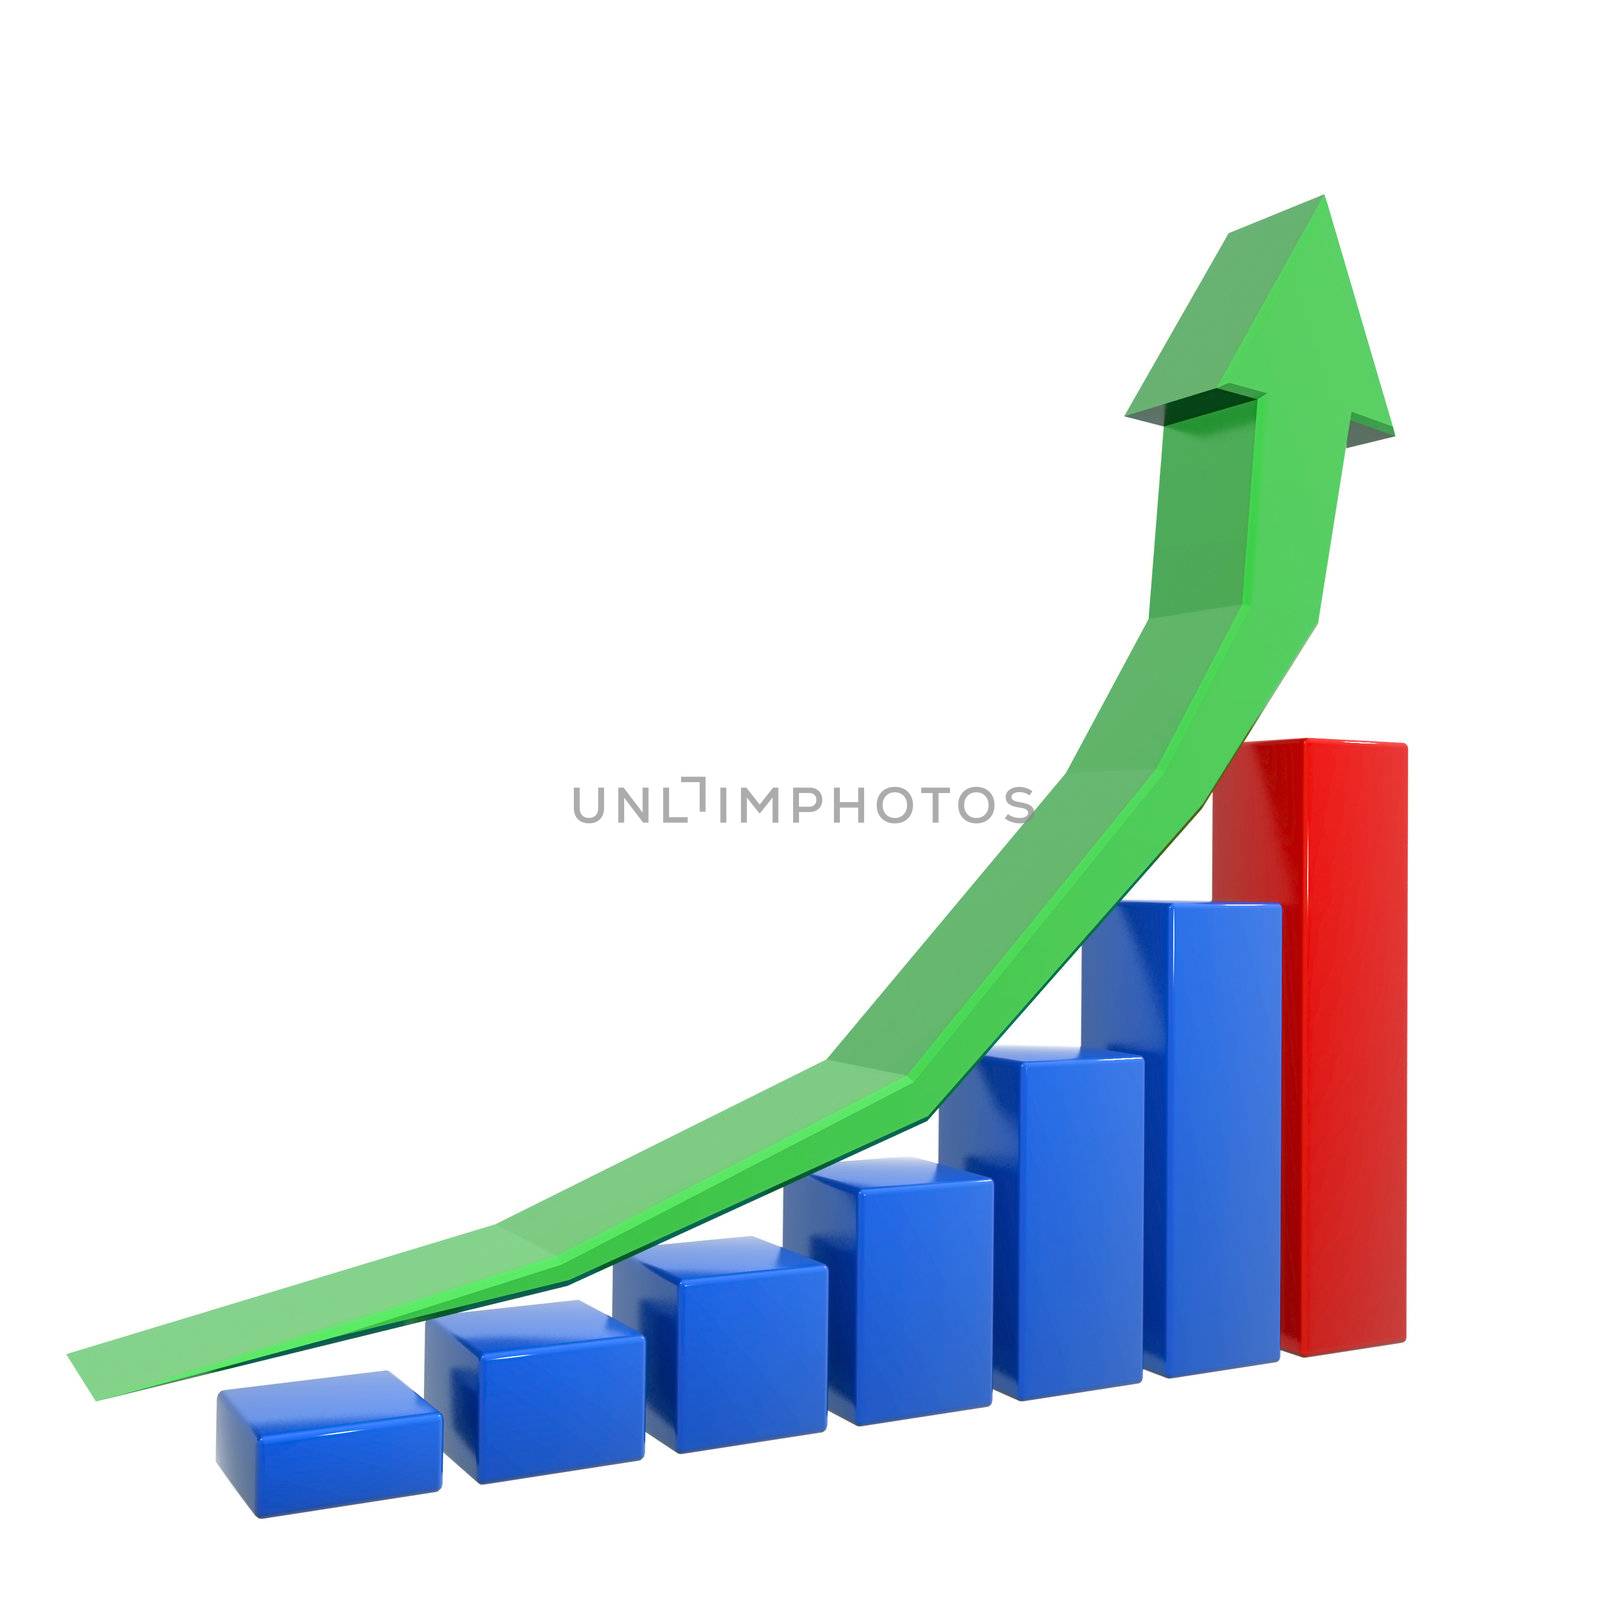 the graph of growth, the statistics of growth, career ladder